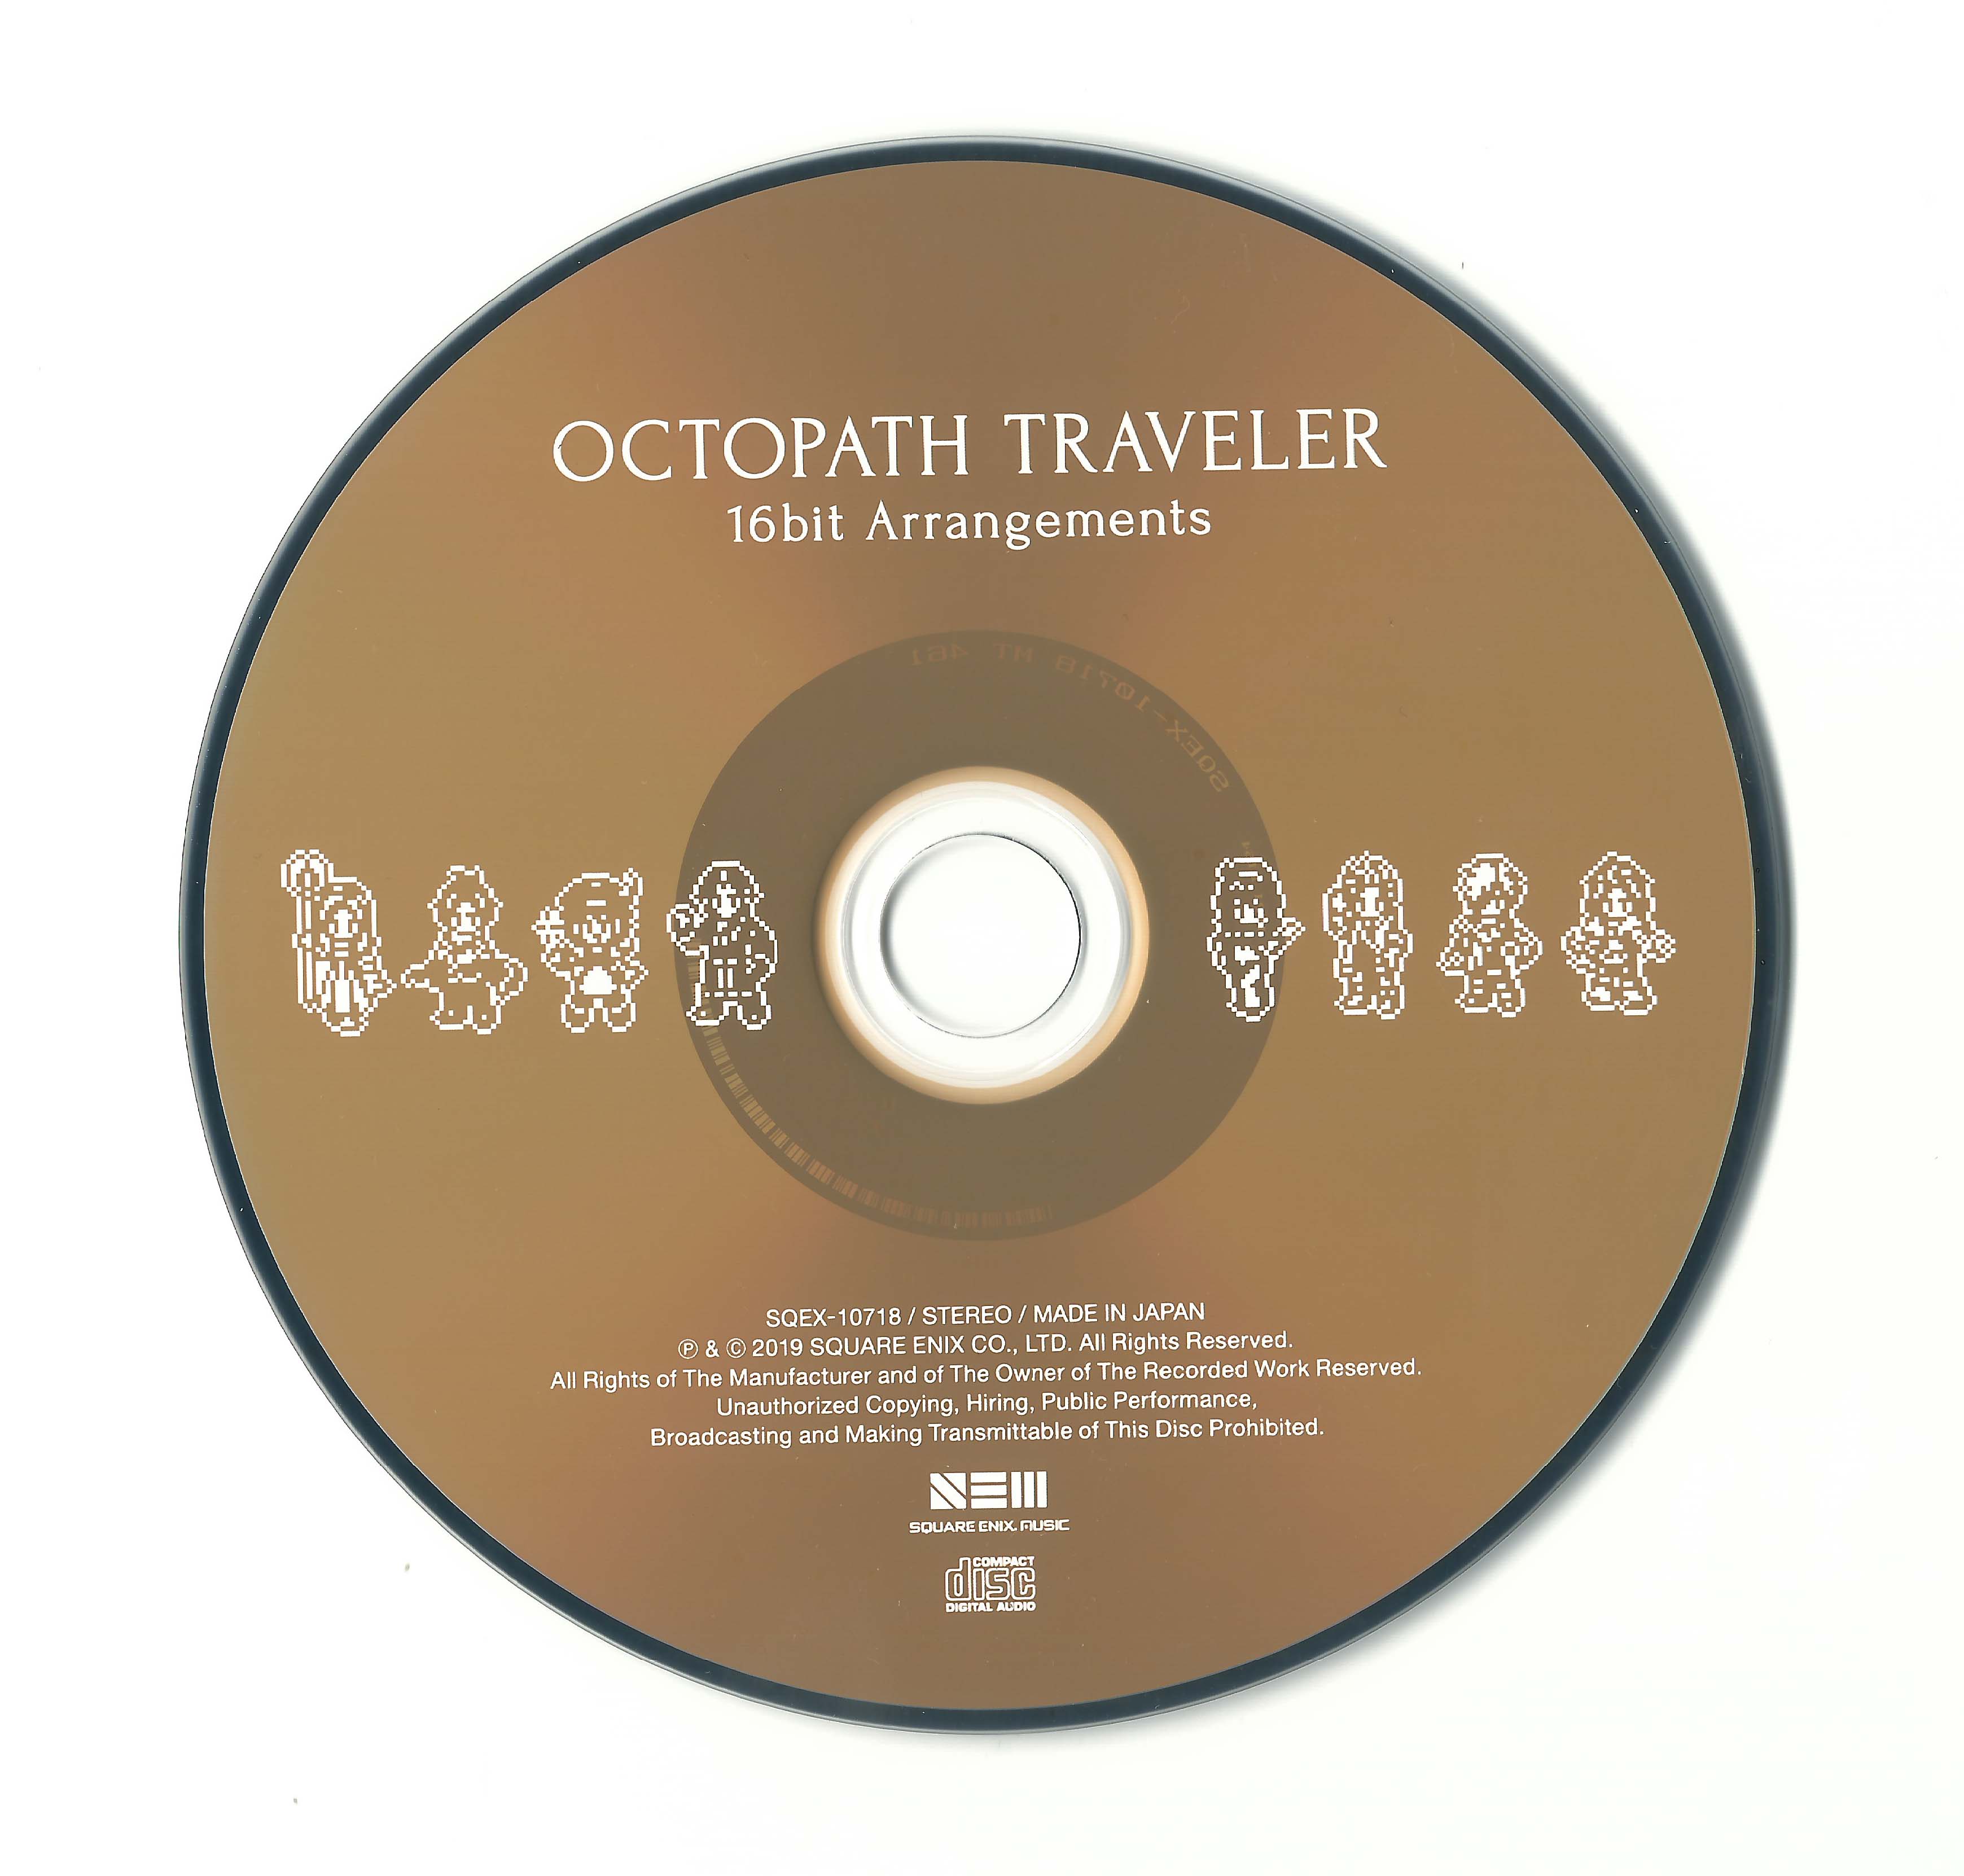 octopath traveler ost download flac